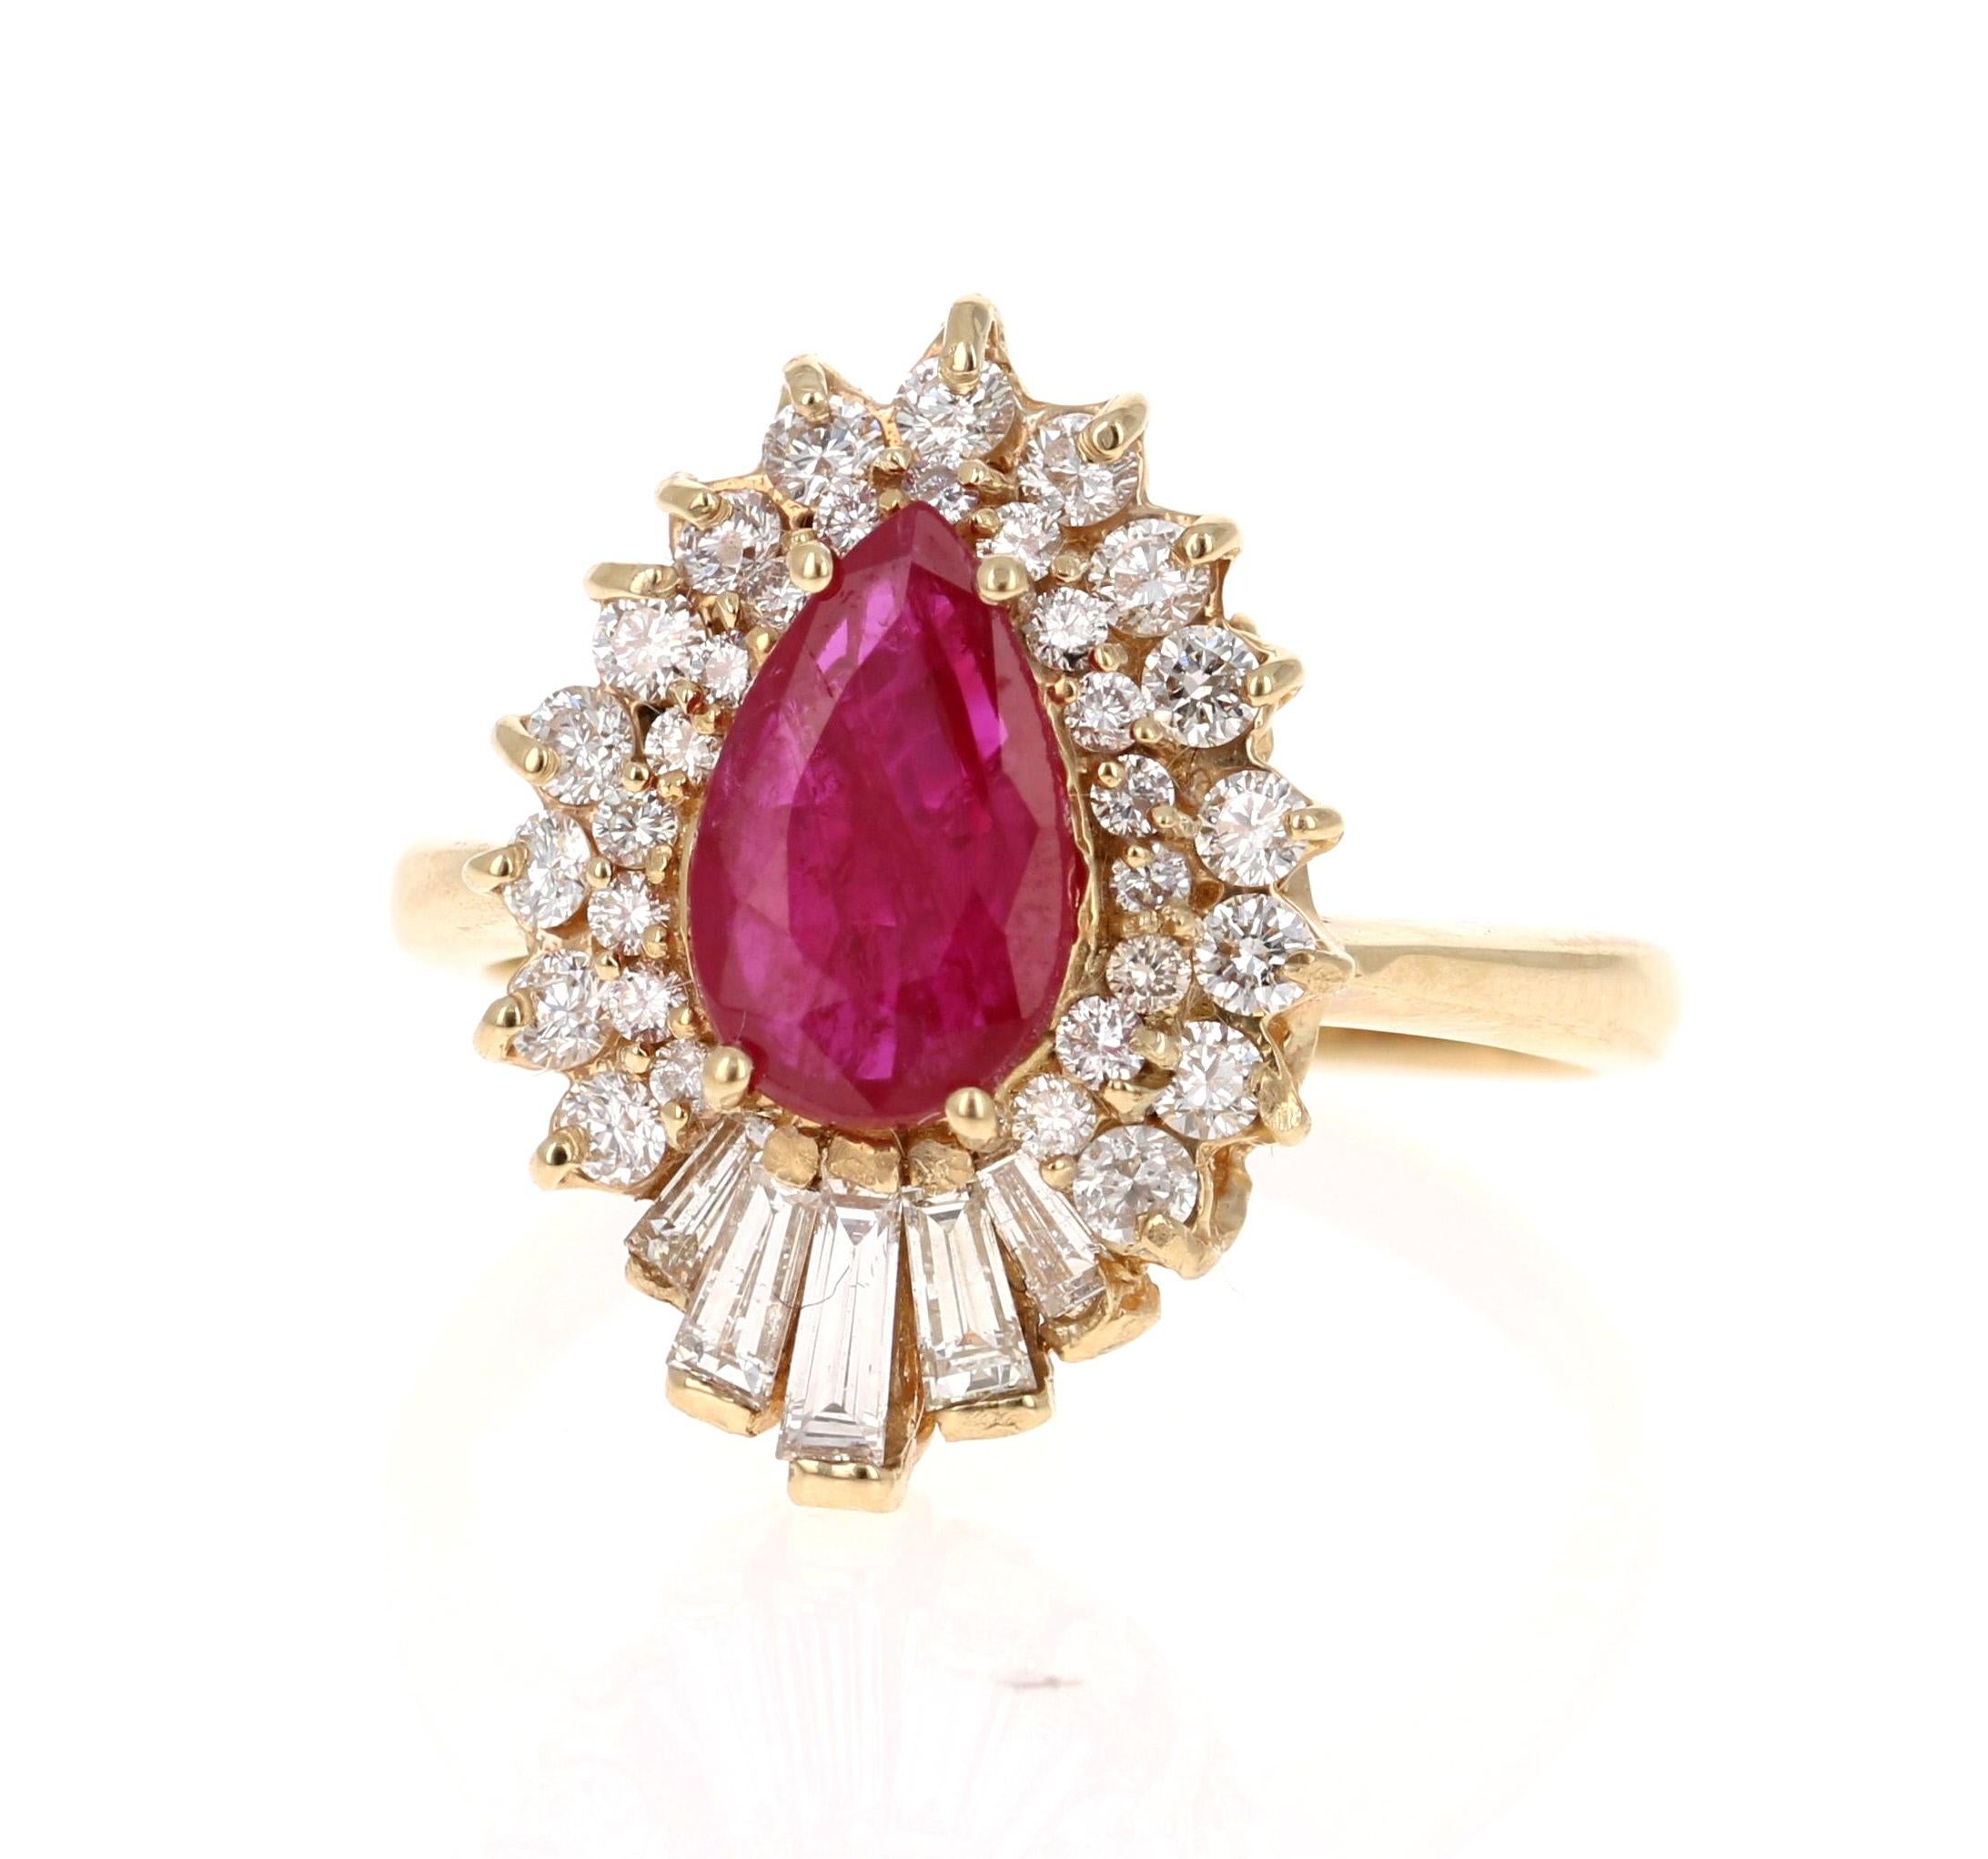 This ring is truly a beauty! 
There is a Pear Cut Ruby set in the center of the ring that weighs 1.01 Carats.  There are also 32 Round Cut Diamonds that weigh 0.60 Carats and 5 Baguette Cut Diamonds that weigh 0.30 Carats.  (Clarity: VS2, Color: F) 